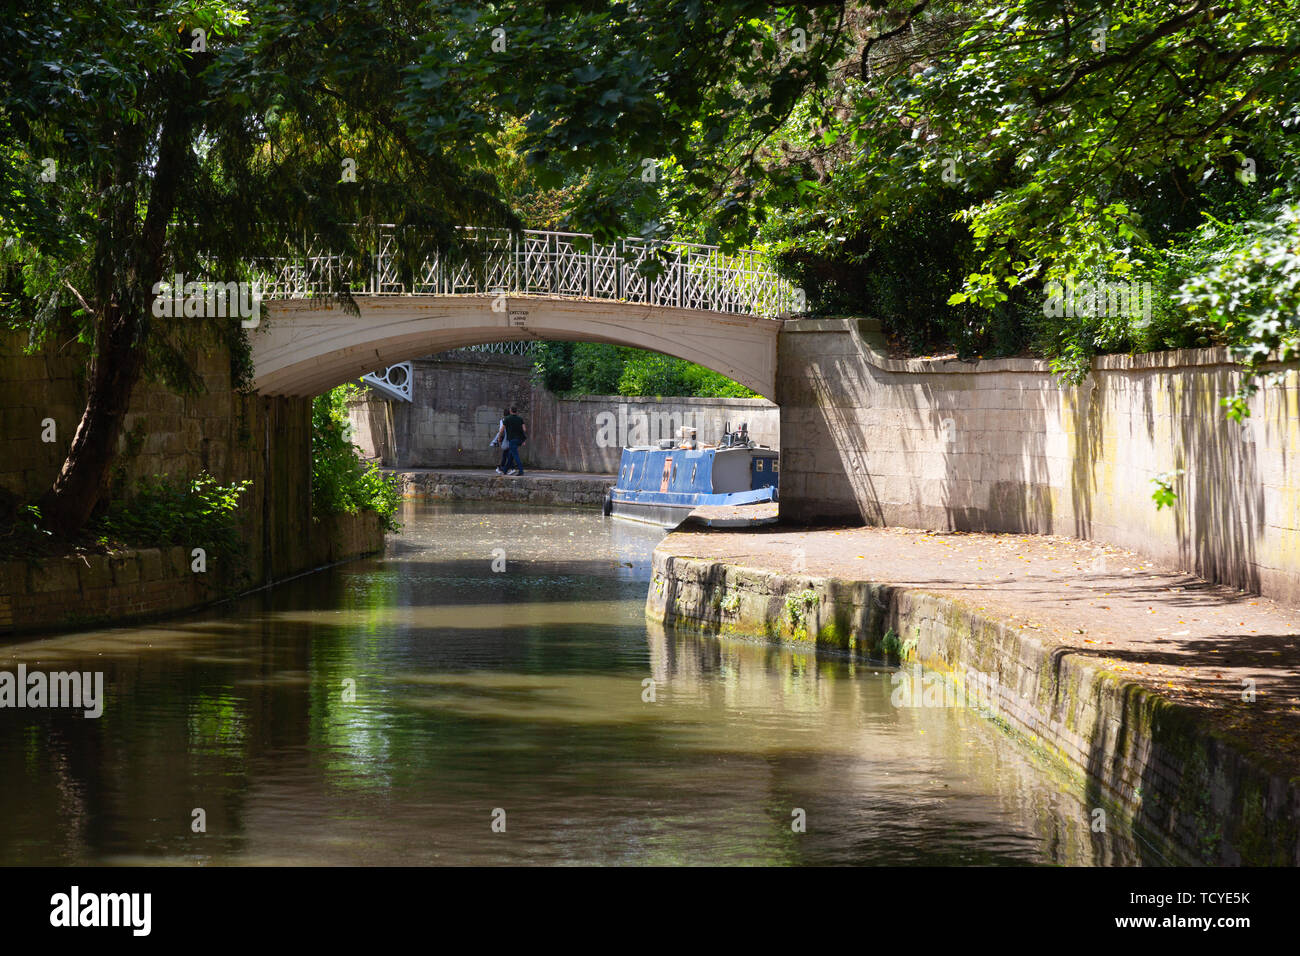 Kennet and Avon Canal Bath England - a canal boat moored on the Kennet and Avon Canal at Bath Somerset UK Stock Photo